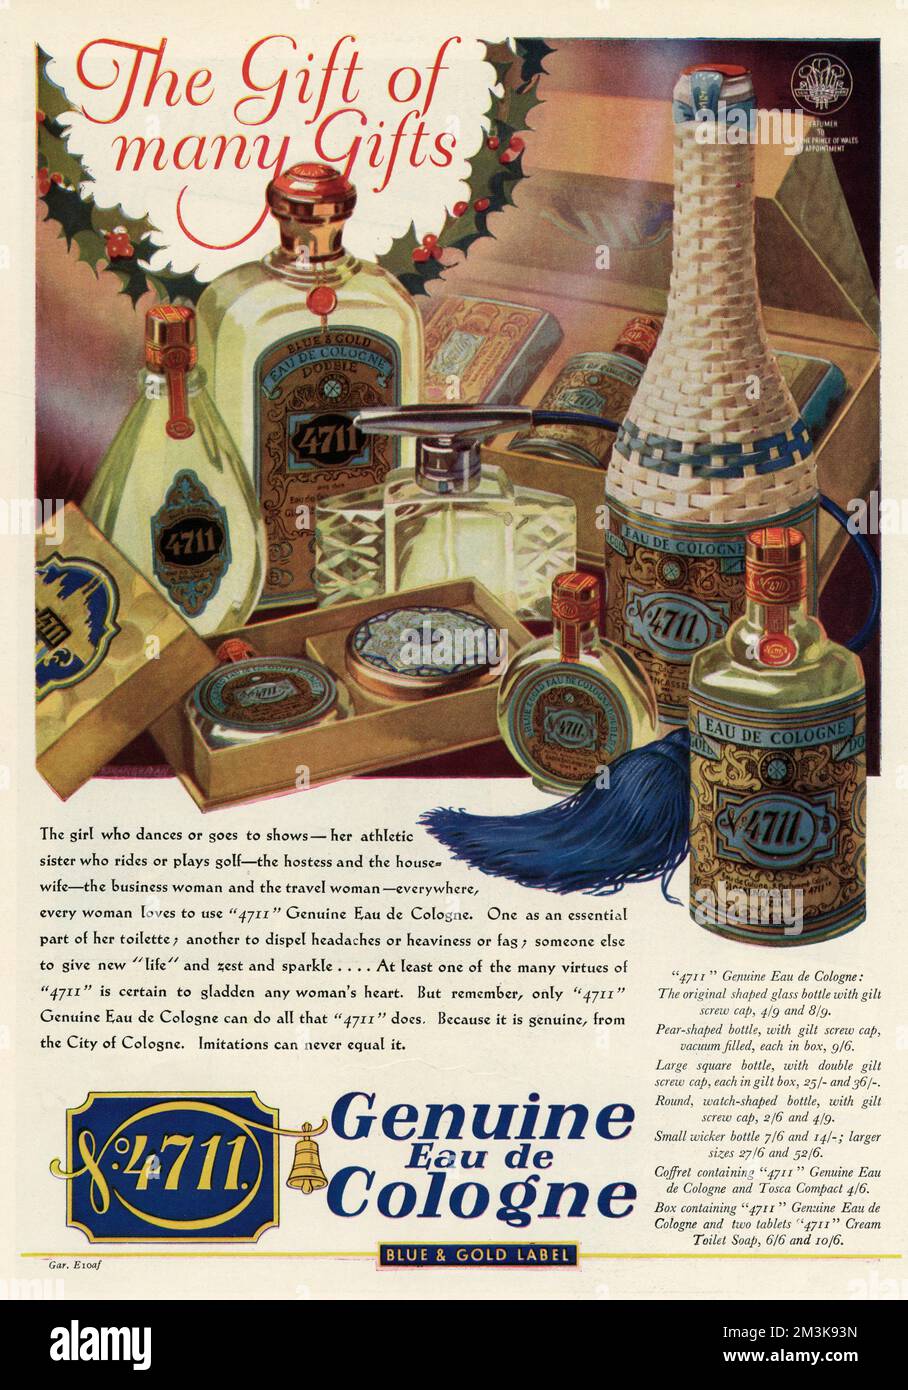 'The gift of many gifts'. Genuine 4711 Eau de Cologne, blue &amp; gold label.  1934 Stock Photo